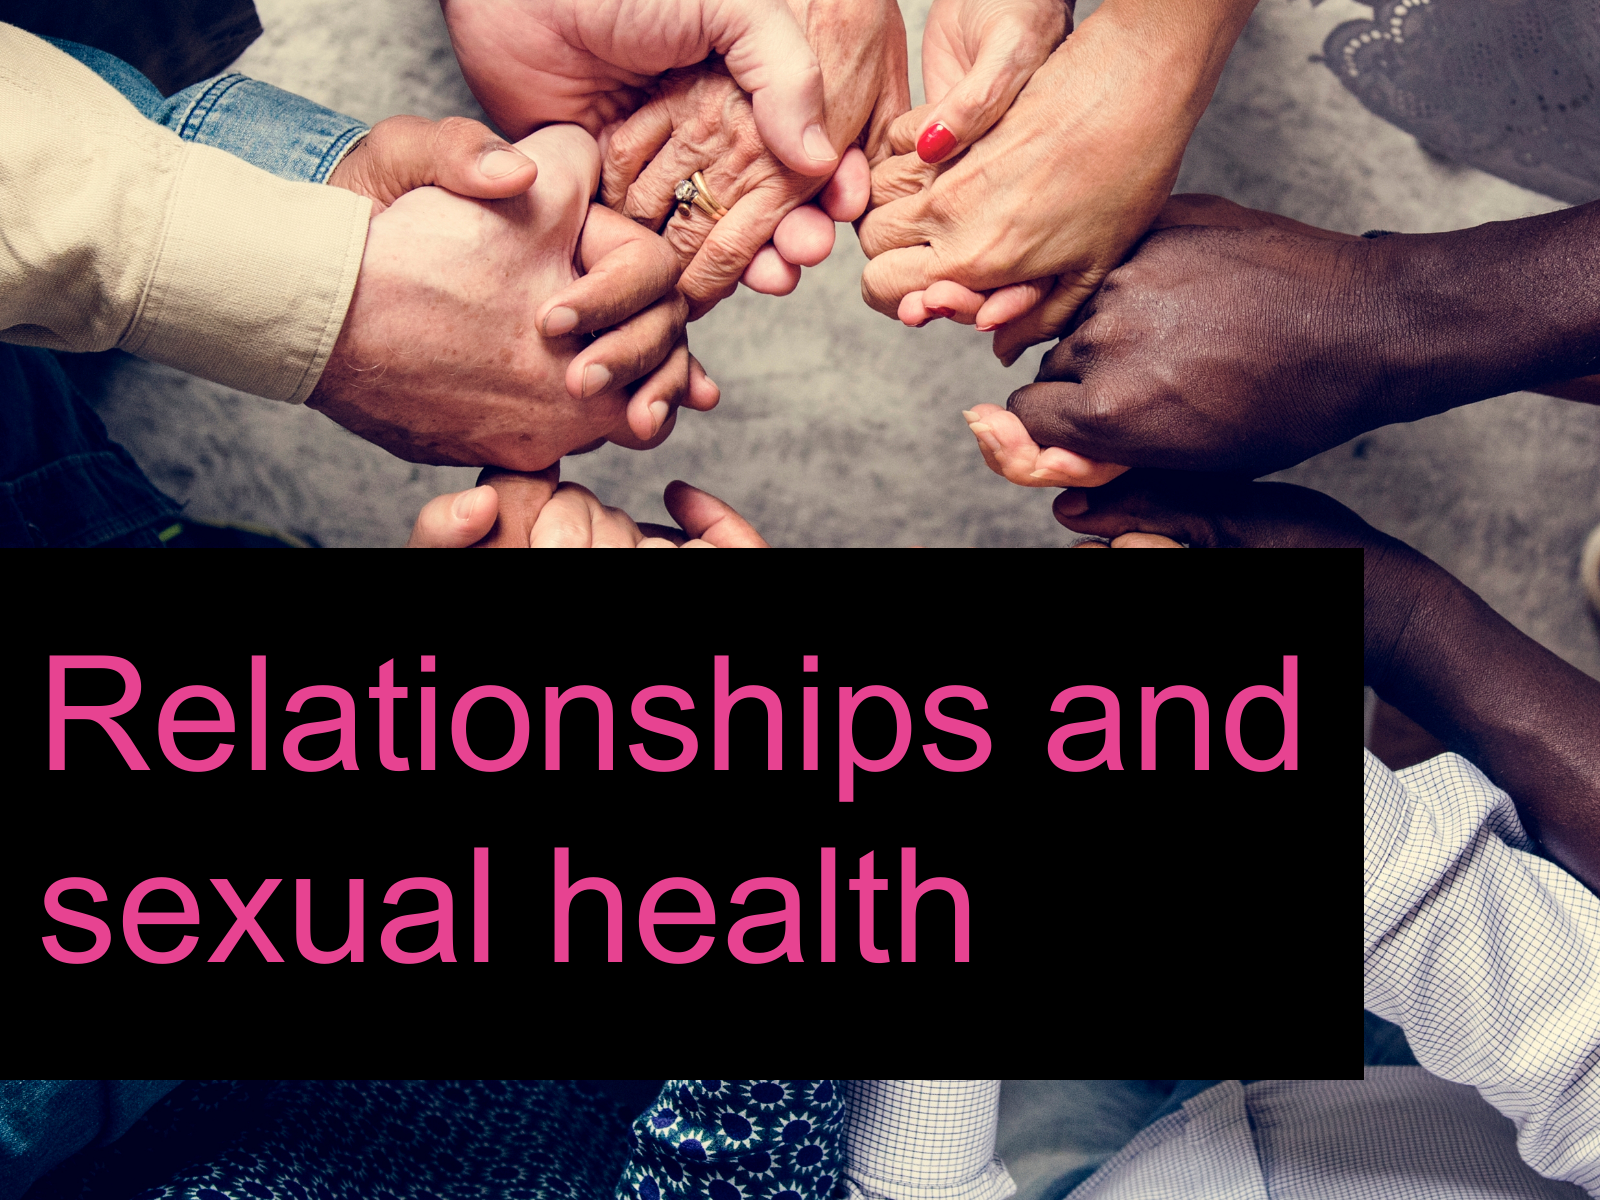 Relationships and sexual health